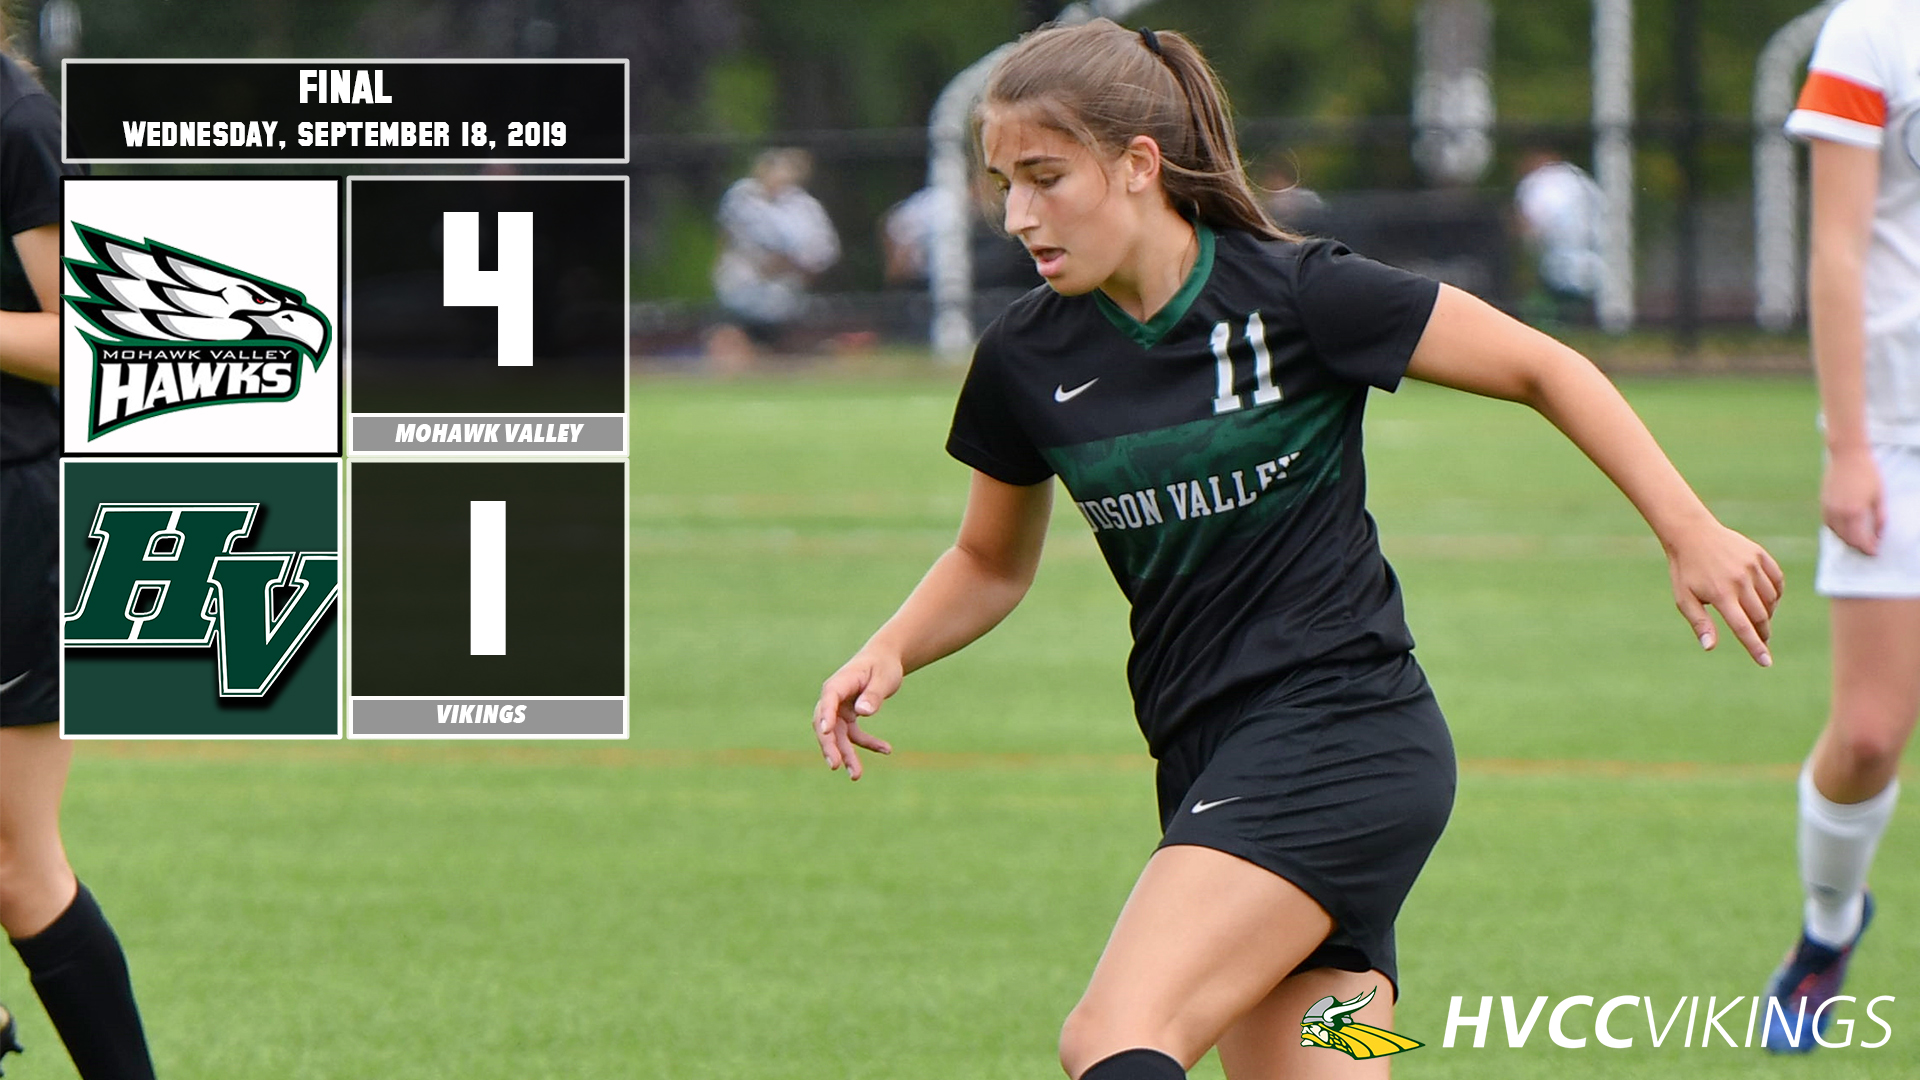 Women's soccer defeated 4-1 at Mohawk Valley on 9/18/2019